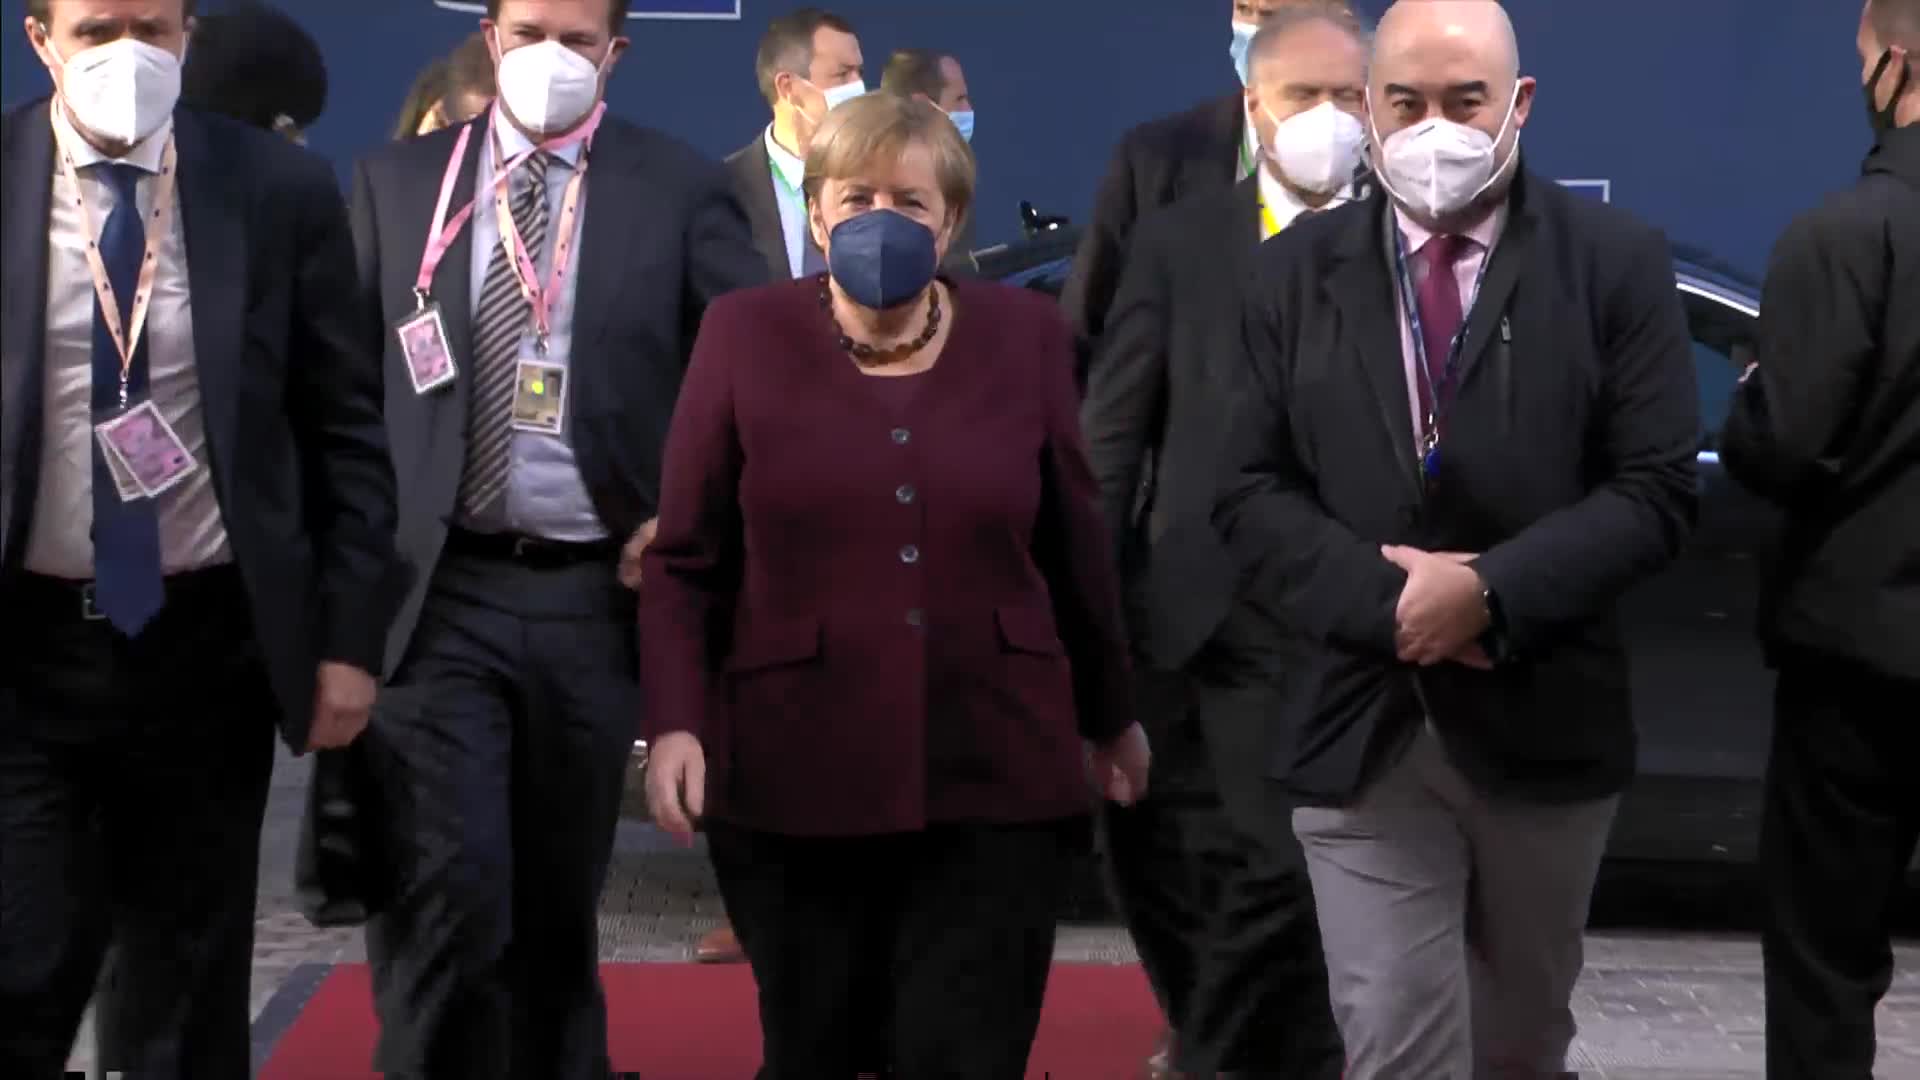 Video: Arrivals at the European Council, second day.